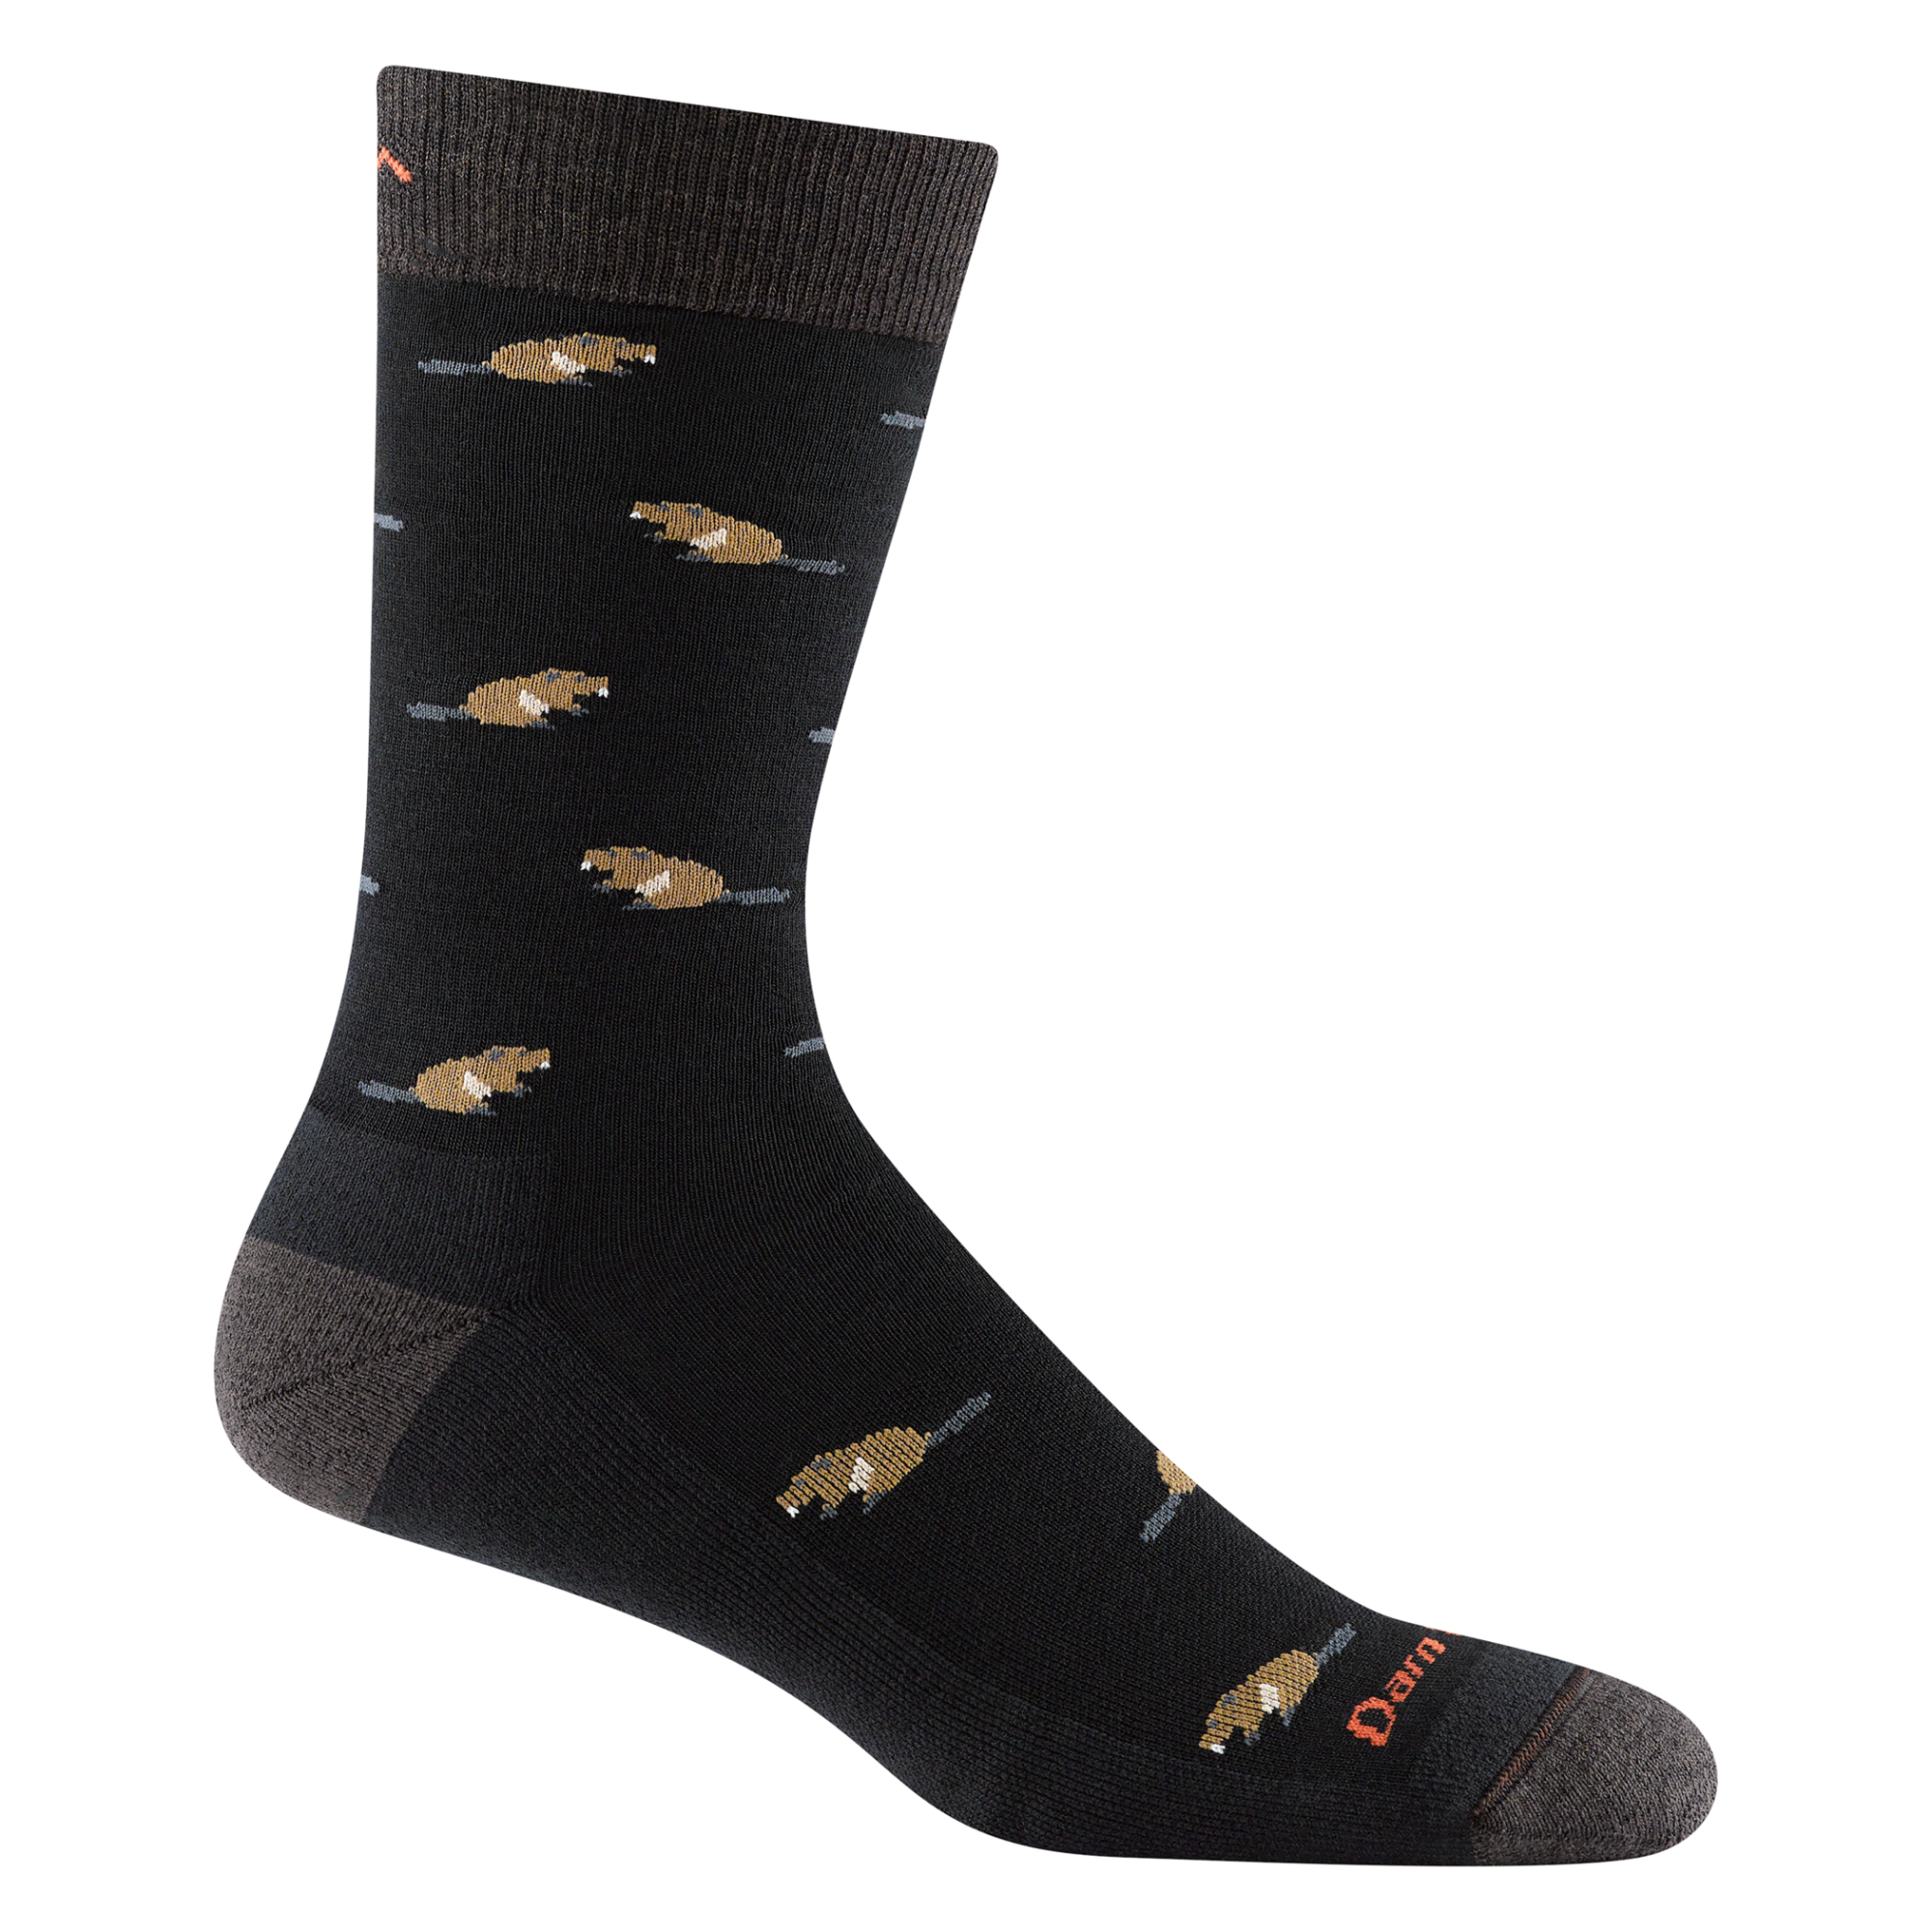 6107 Sawtooth Crew Lightweight Lifestyle featuring multiple small beavers, dark grey heel/toe with black for the body of the sock